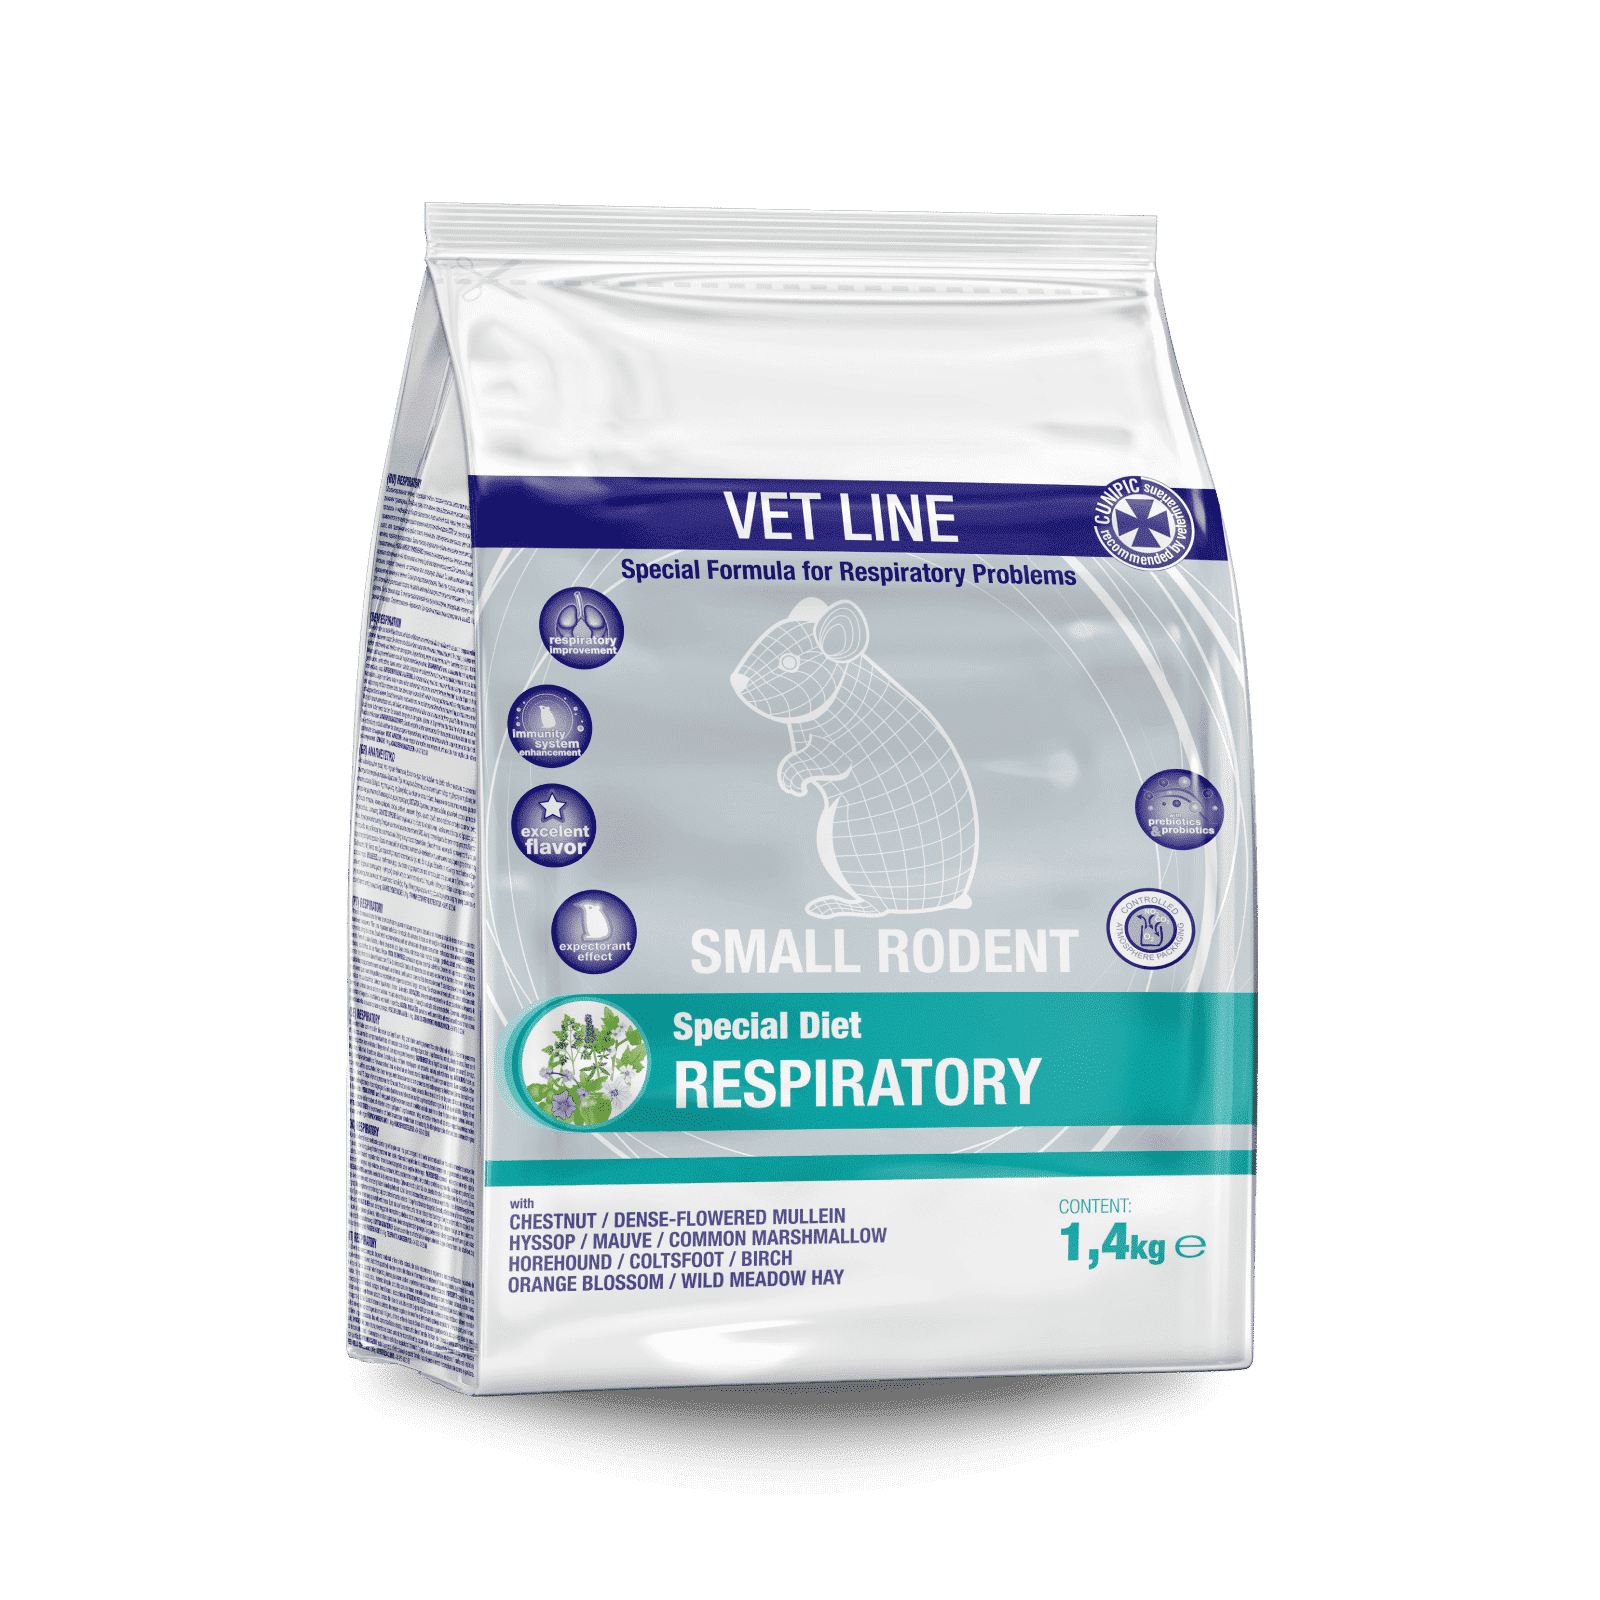 Respiratory for Small Rodents 1.4kg Vet Line